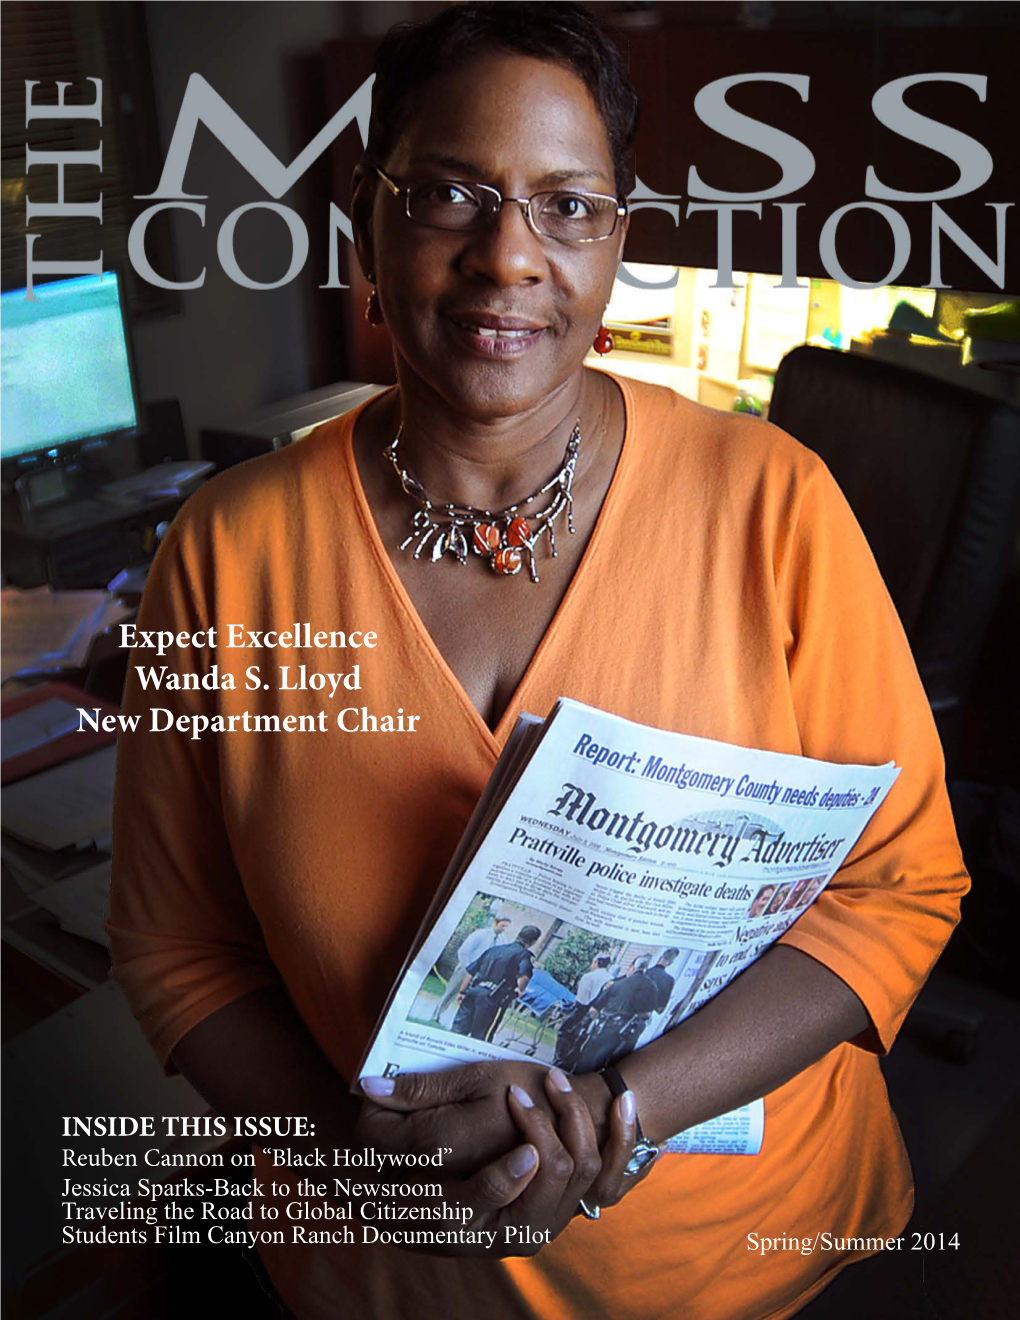 Expect Excellence Wanda S. Lloyd New Department Chair